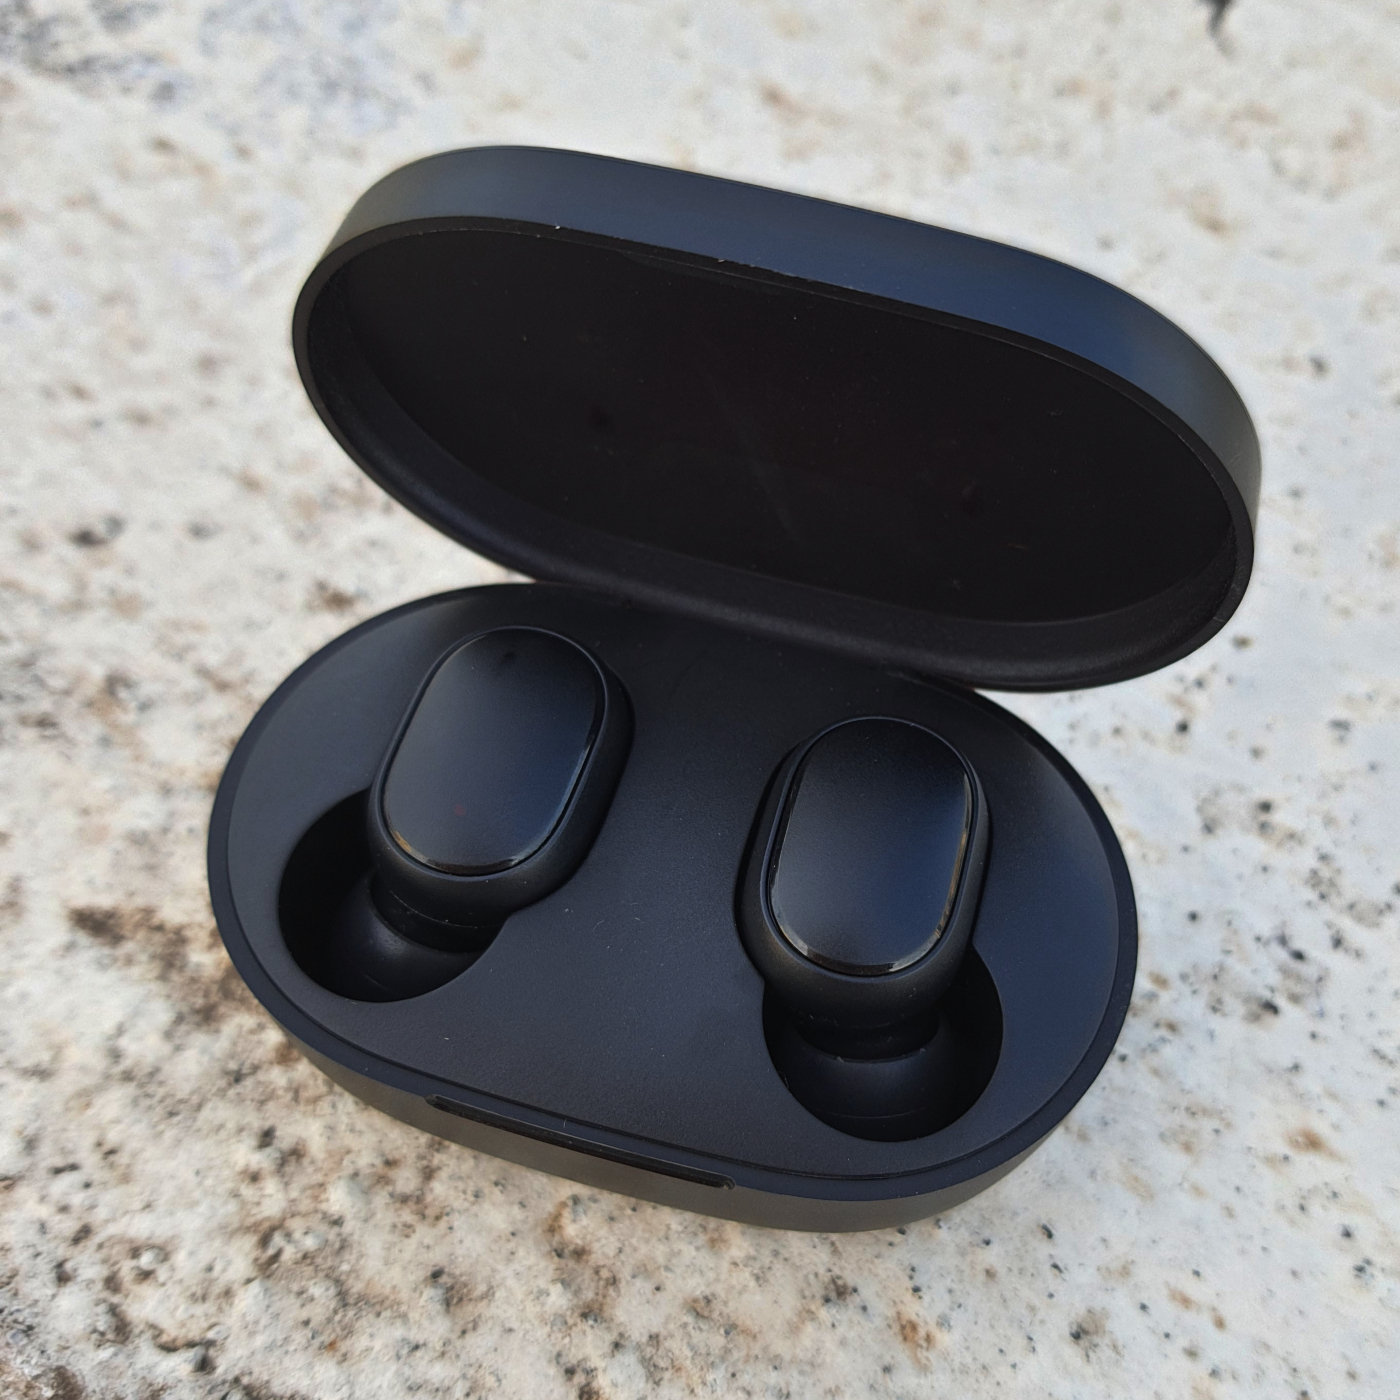 REDMI Earbuds S Bluetooth Headset Price in India - Buy REDMI